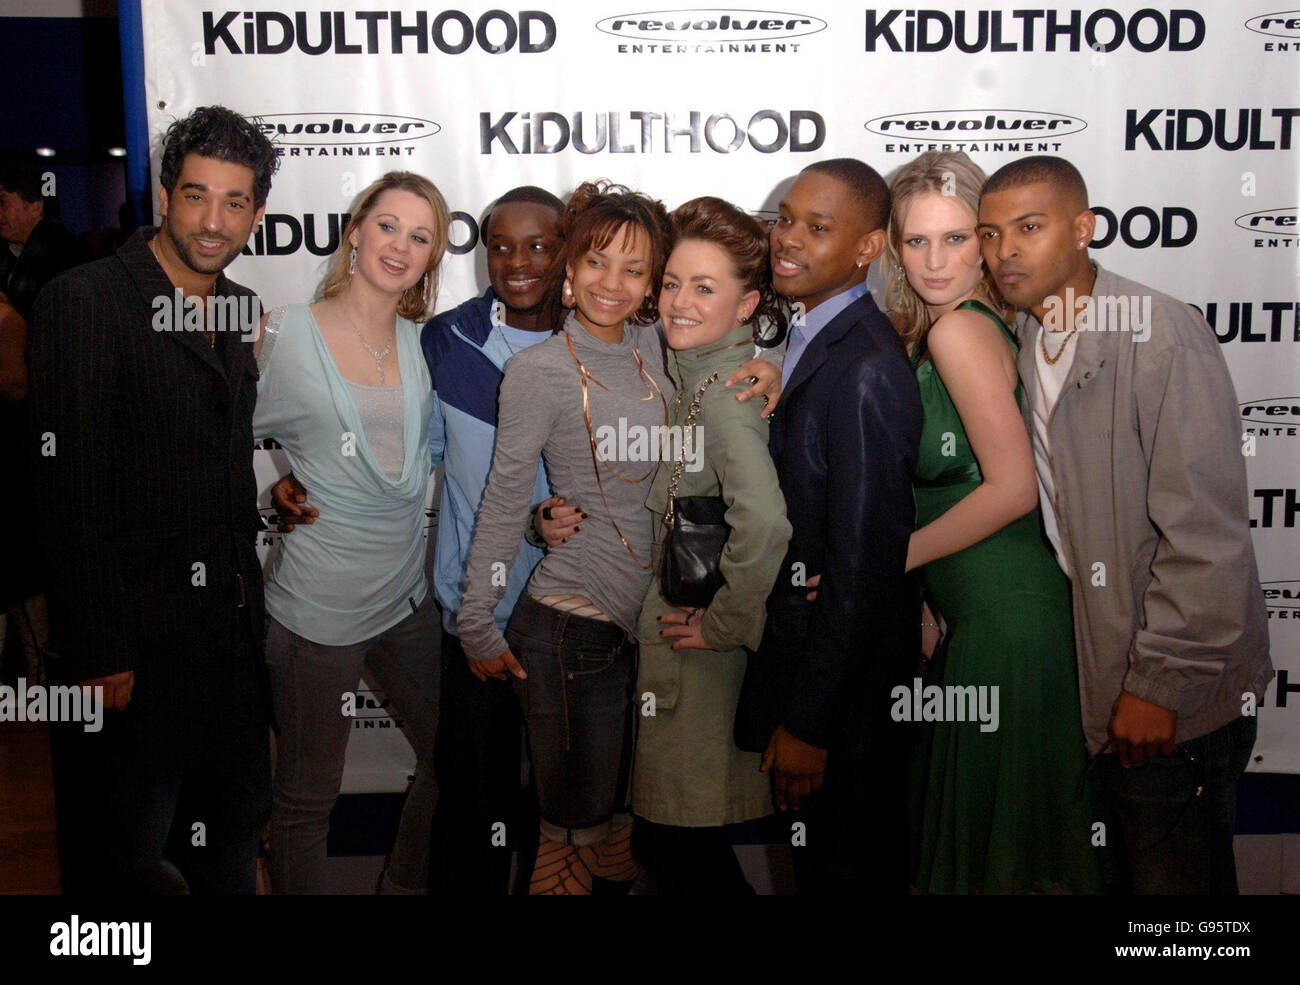 Left to Ray Madeleine Fairley, Femi Oyeniran, Red Madrell, Jaime Winstone, Aml Ameen, Rebecca Martin and Noel arrive for the UK film premiere of 'Kidulthood', at the Odeon West